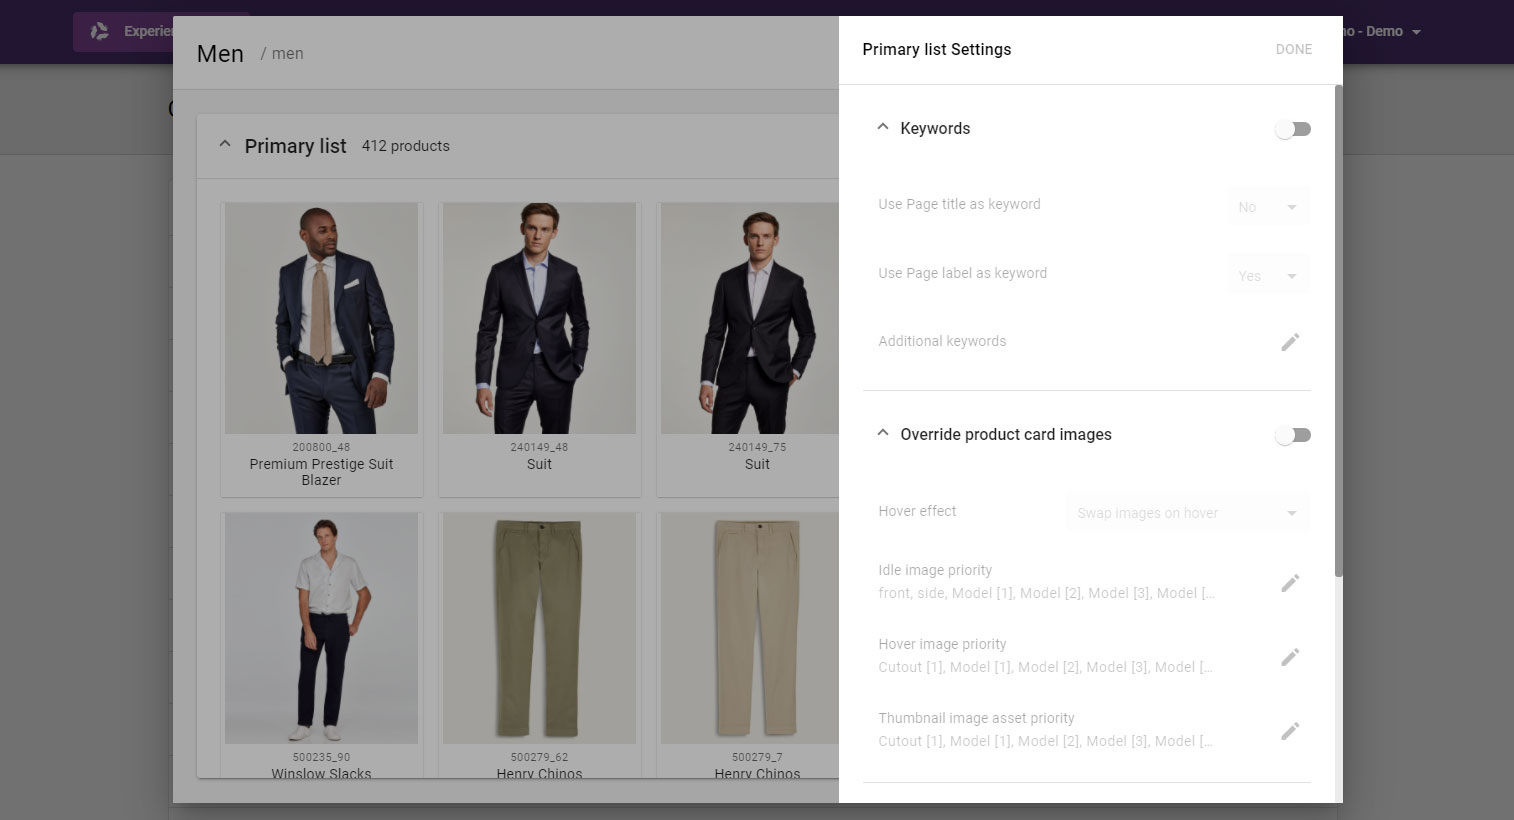 Screenshot of Category and Landing Page - Product list settings